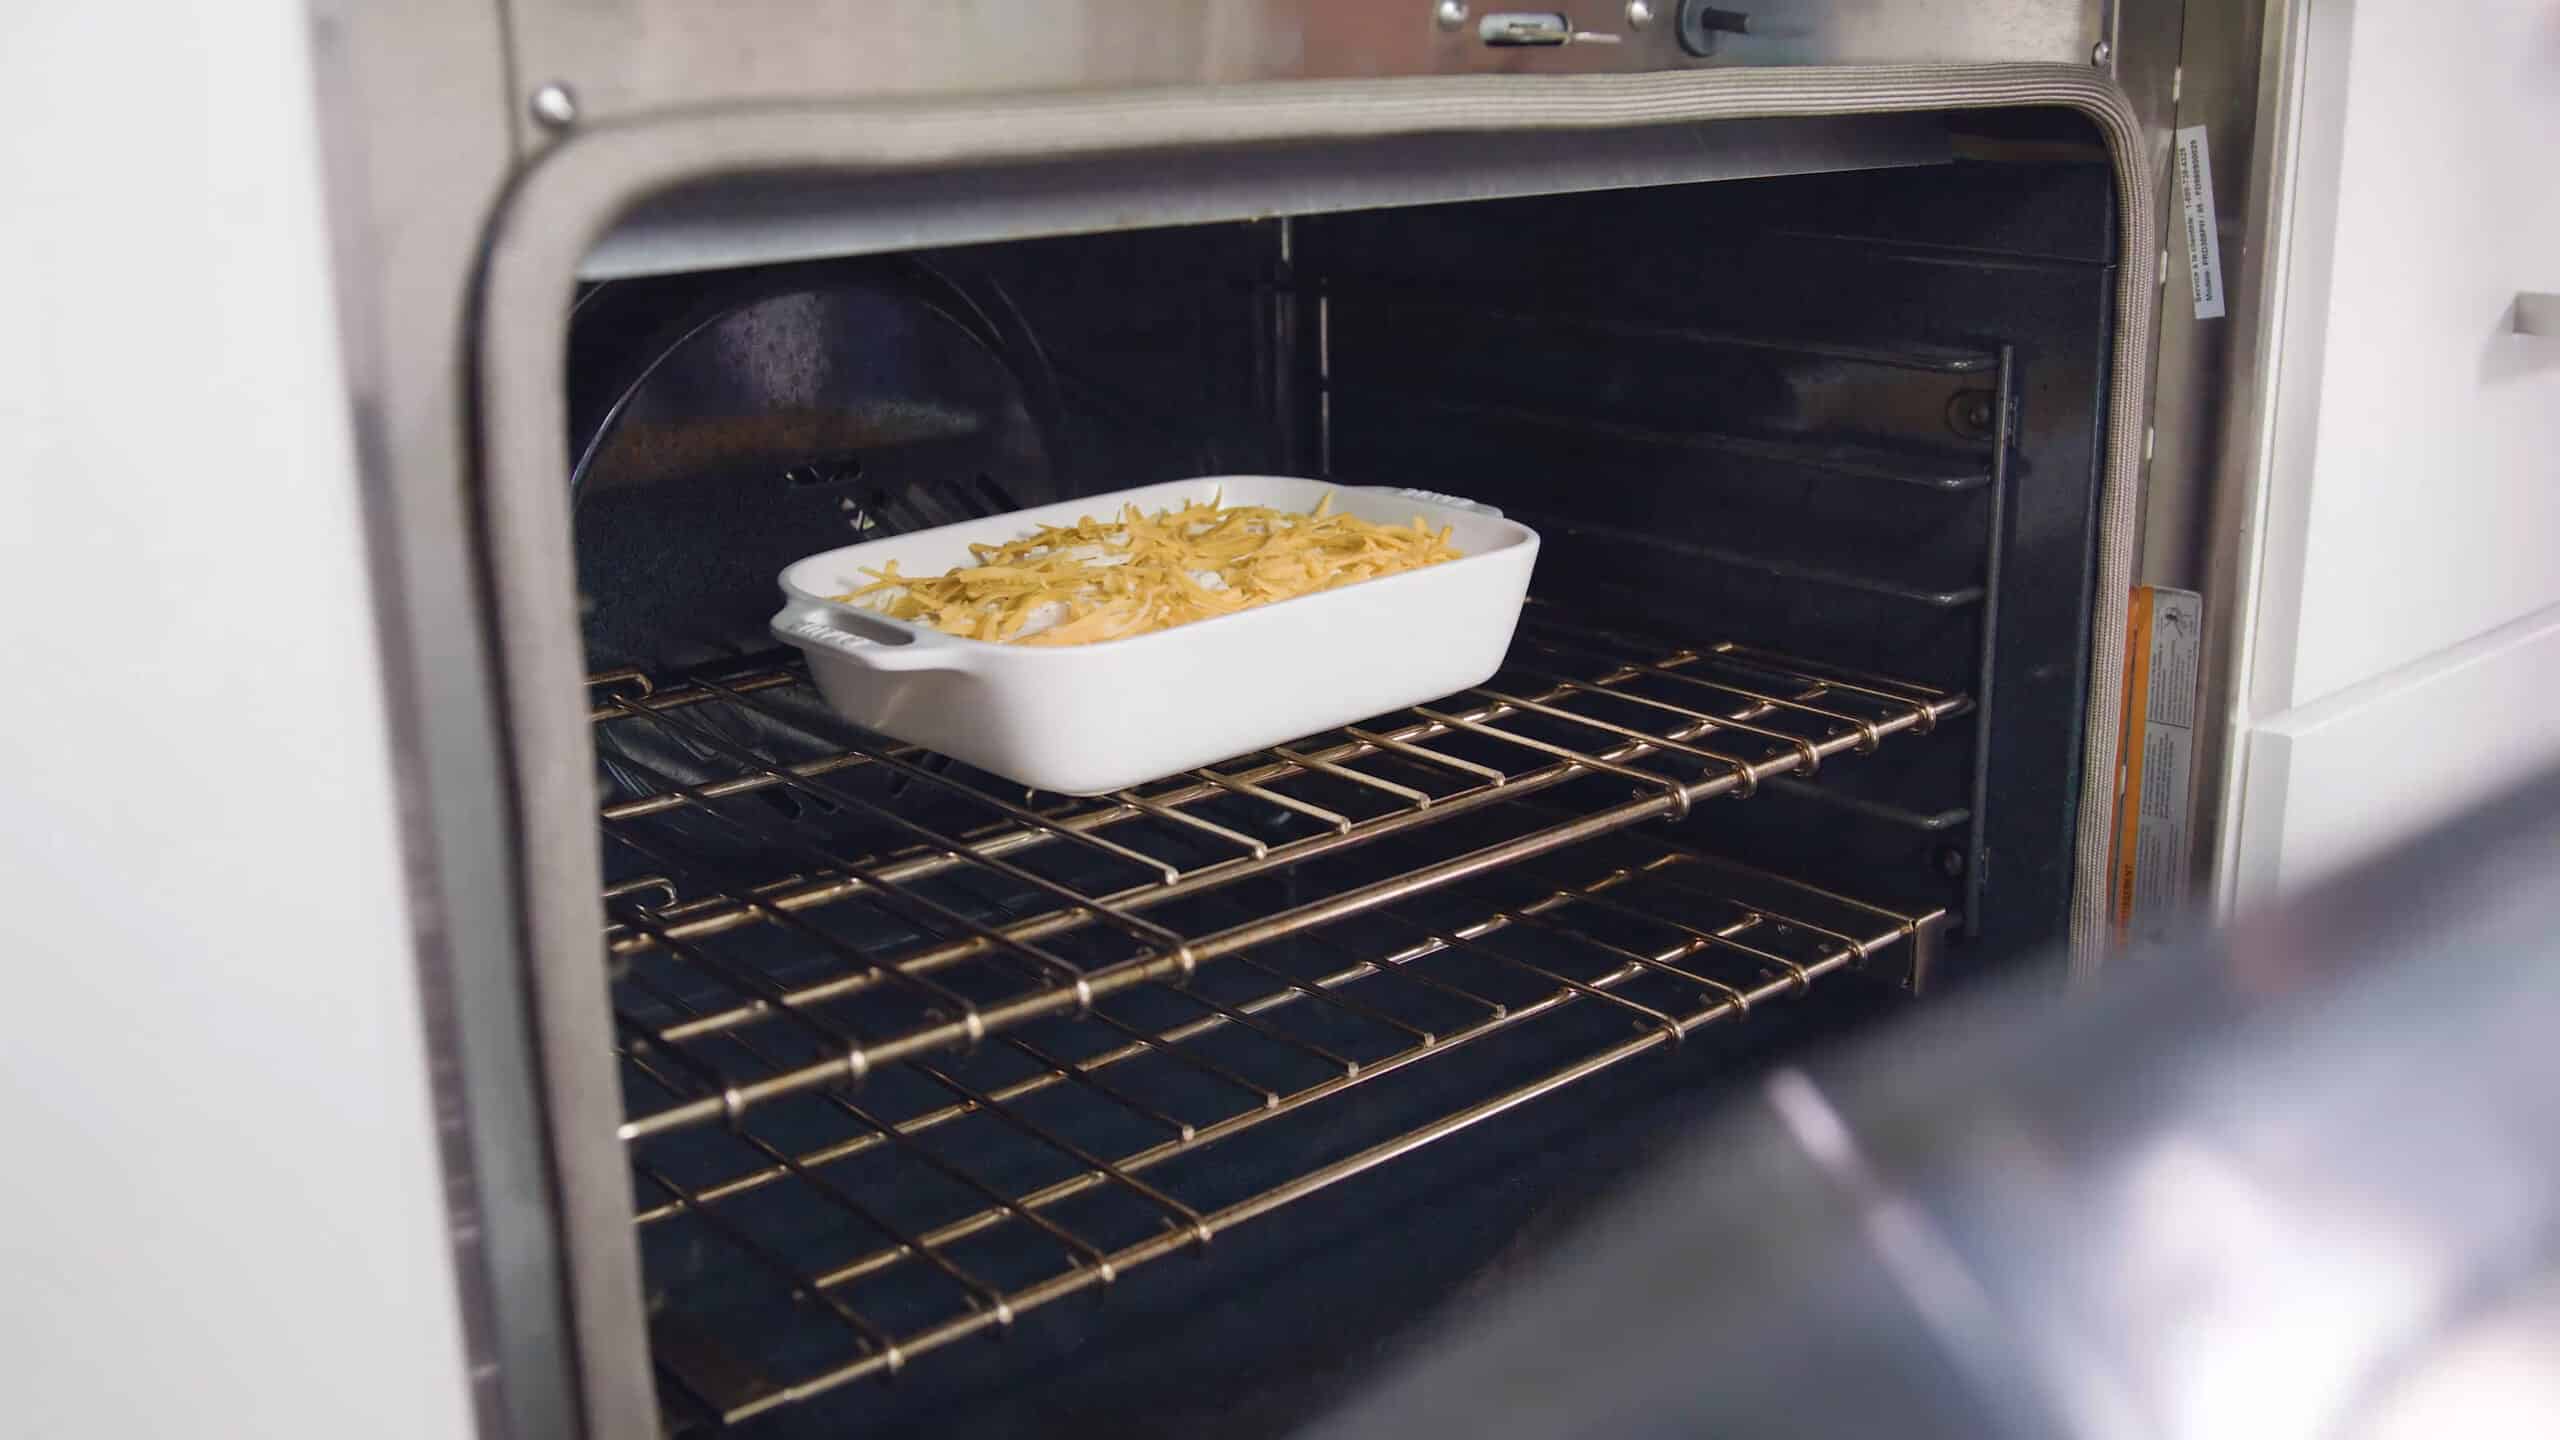 Angled view of open oven with white casserole dish filled with cheesy scalloped potatoes on a rack in the middle of the oven.